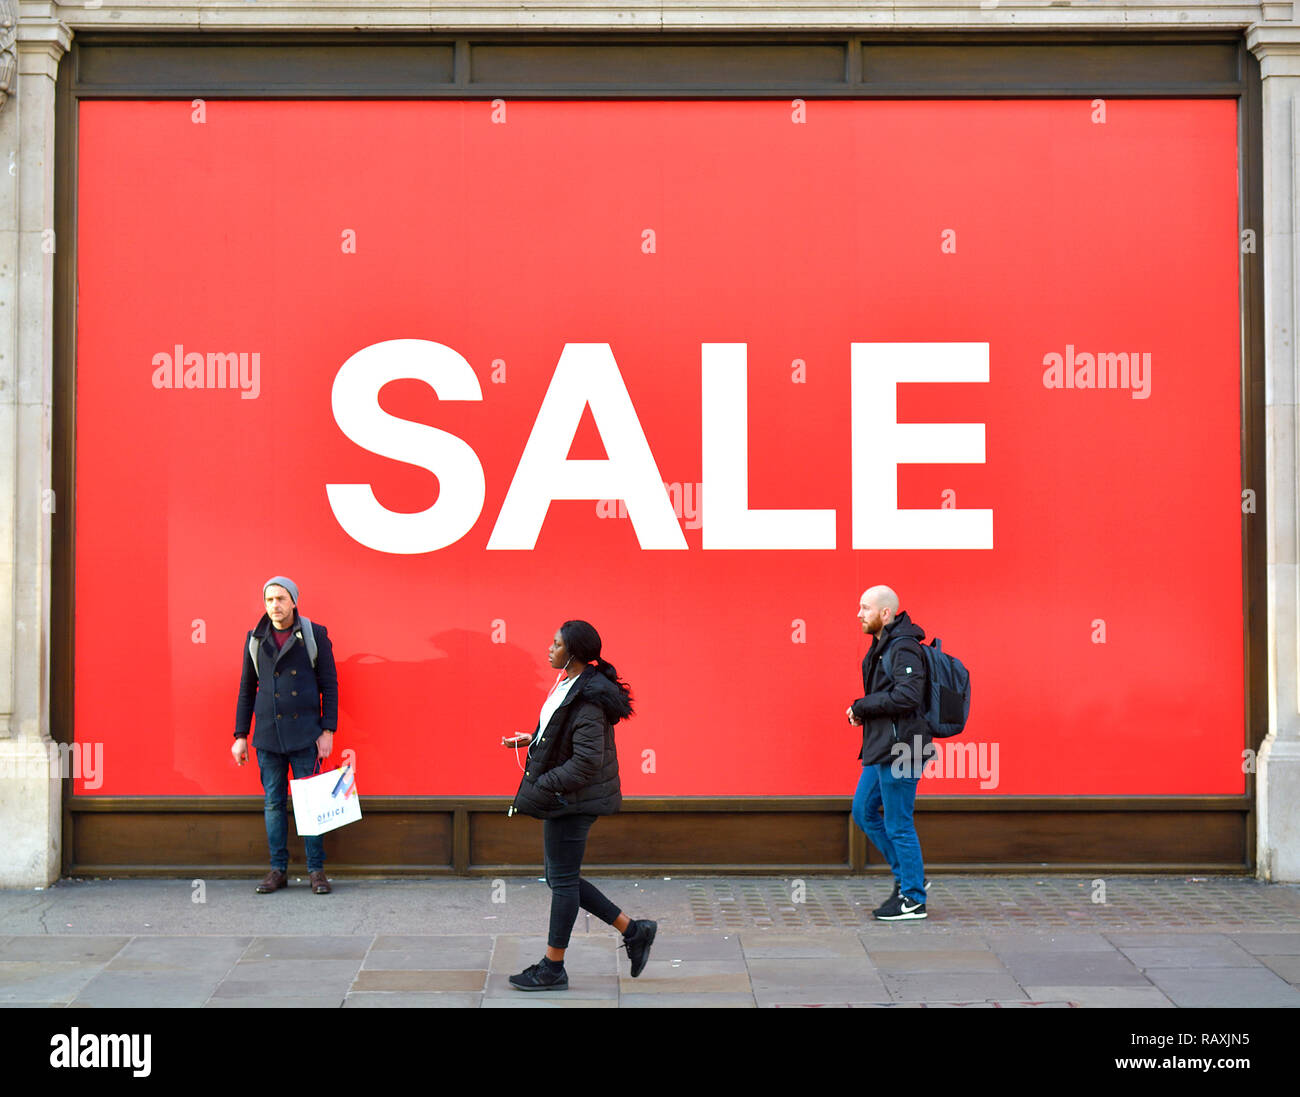 SALE sign in shop window - (H&M, Regent Street) - in January. London, England, UK. [SHOP NAME REMOVED DIGITALLY] Stock Photo